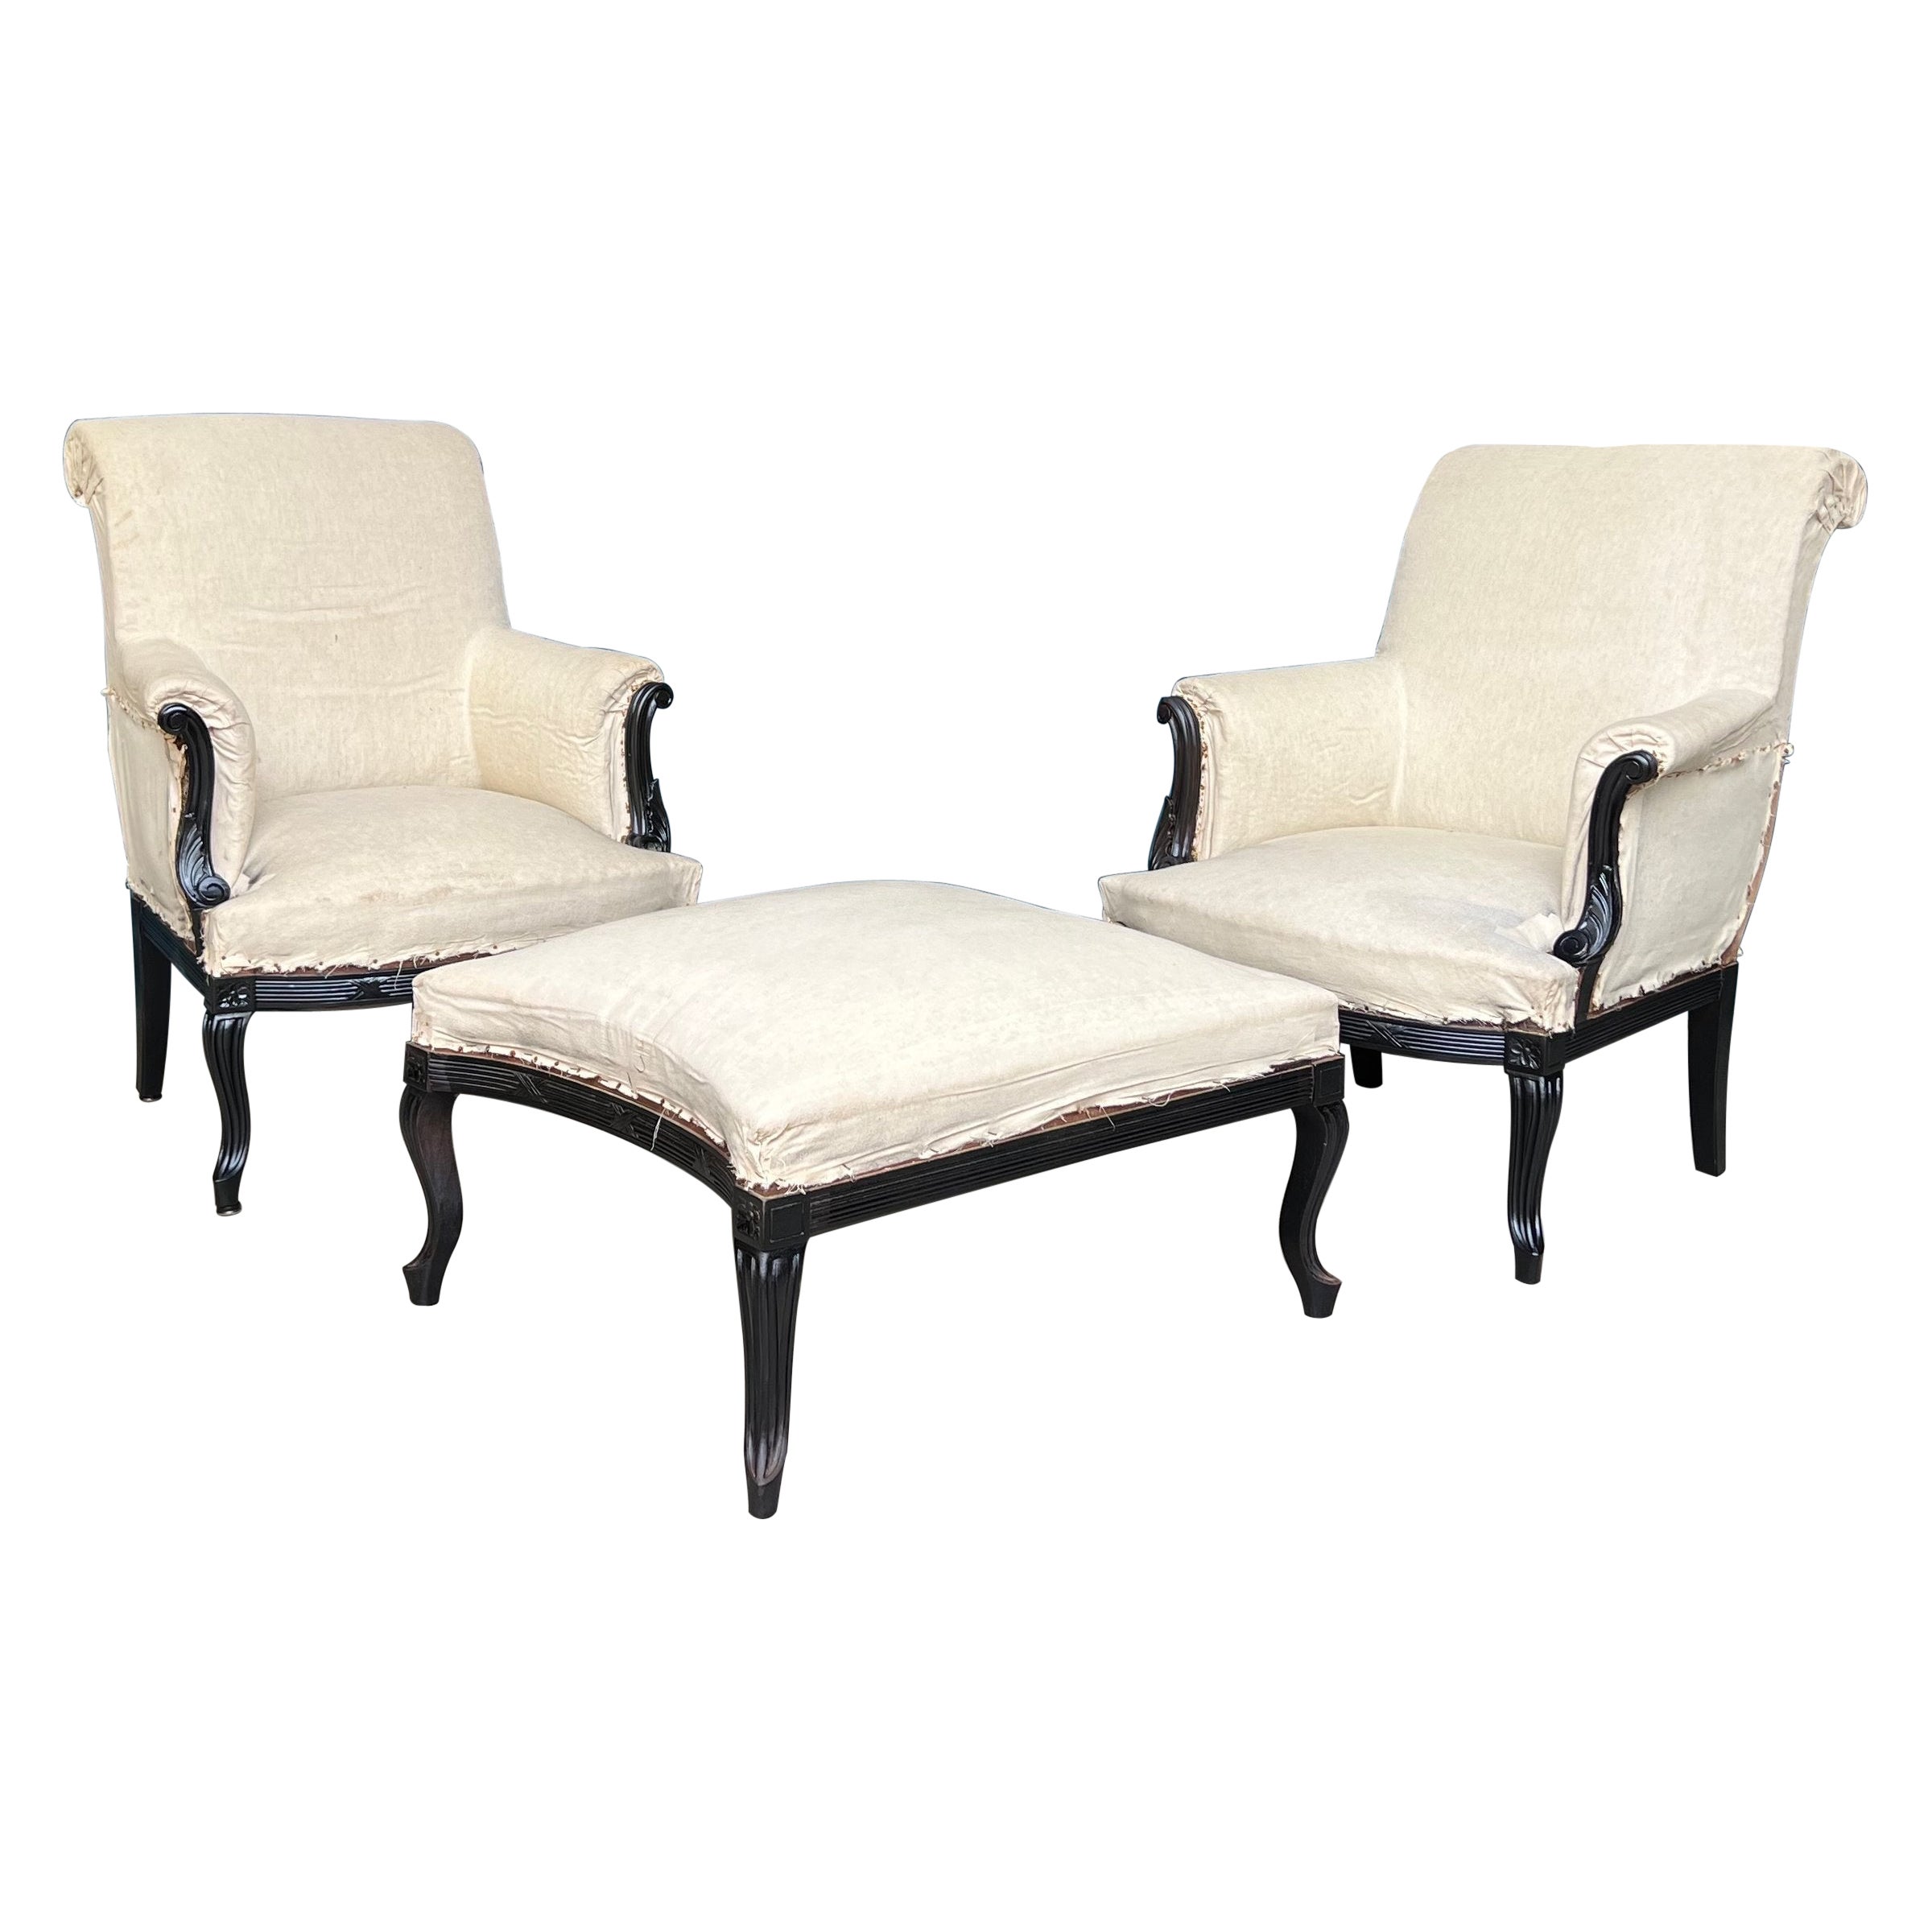 Pair of French Armchairs in Muslin with Matching Ottoman